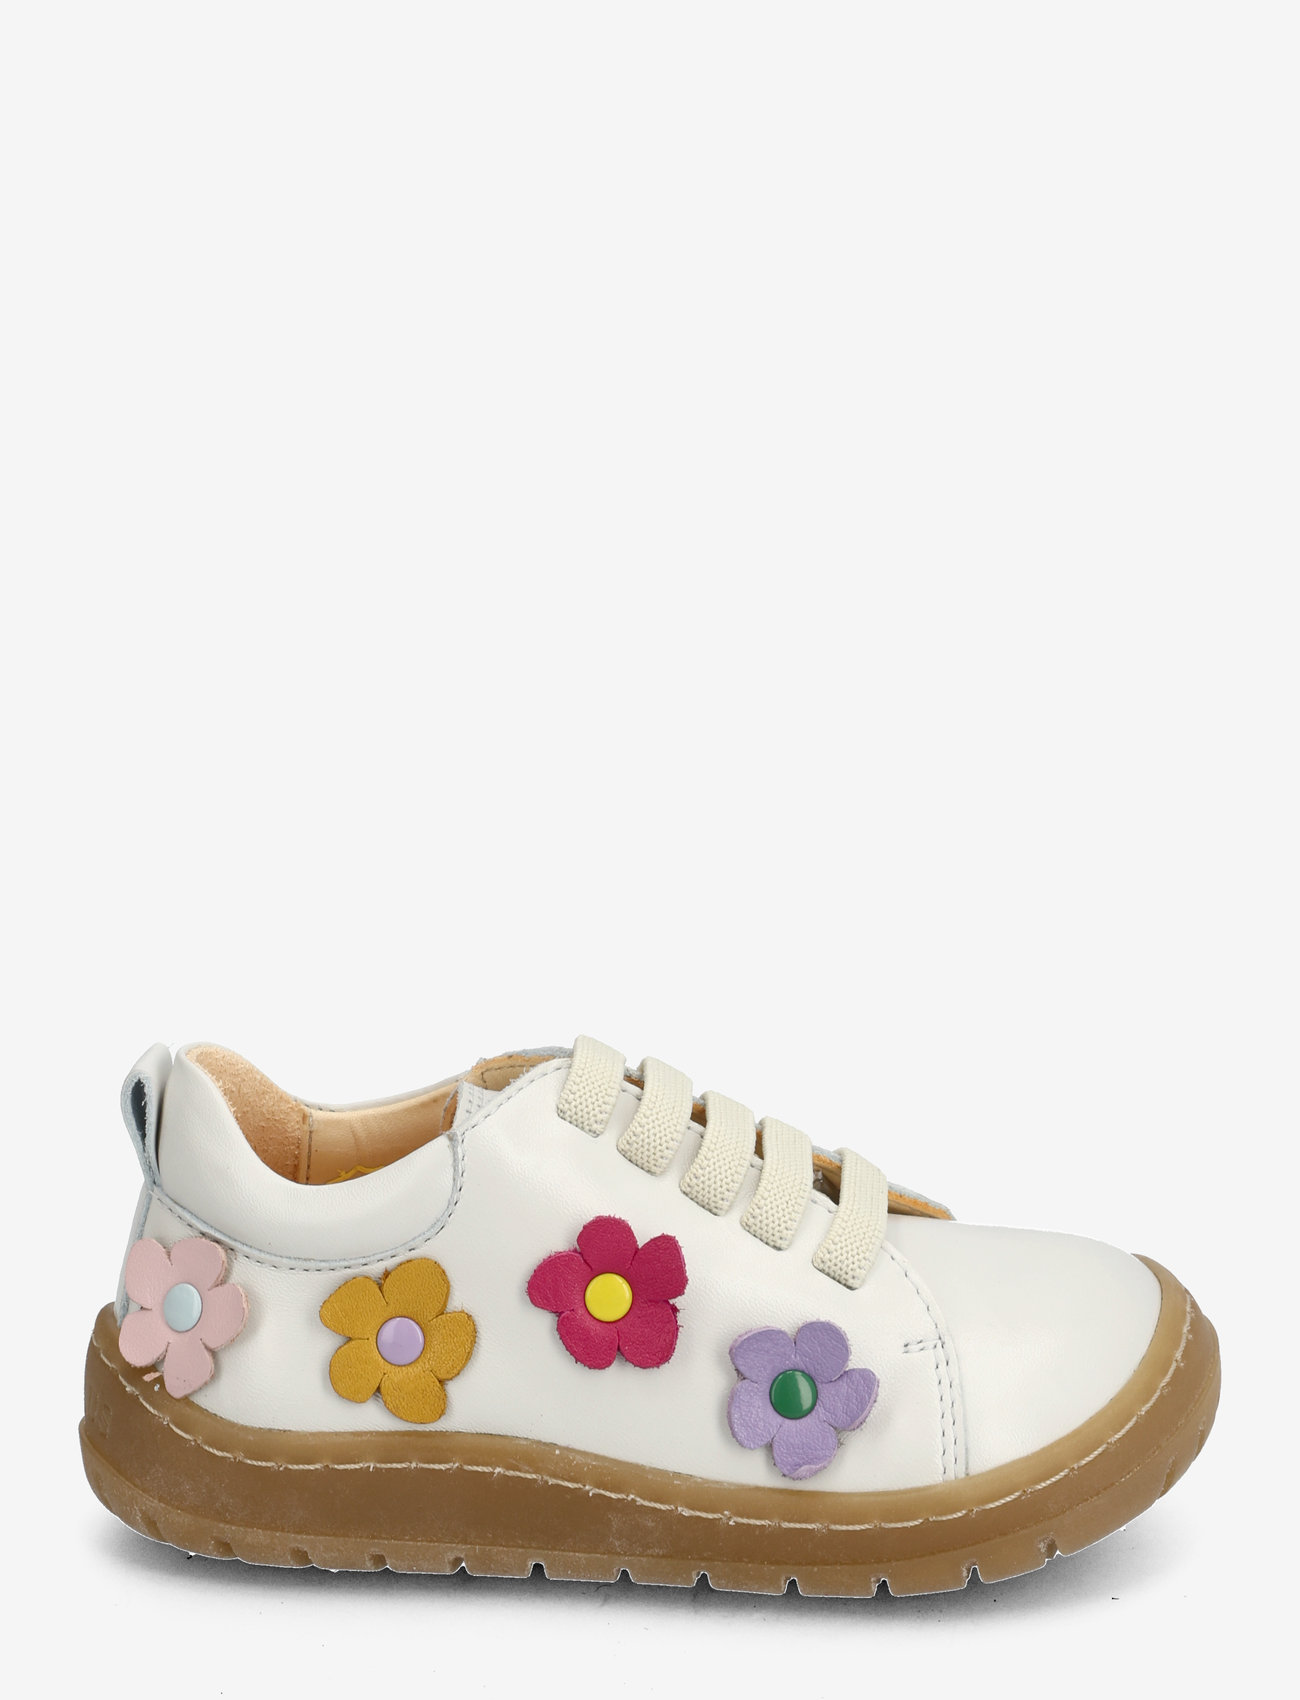 ANGULUS - Shoes - flat - with lace - gode sommertilbud - 1493/a002 off white/flowers - 1